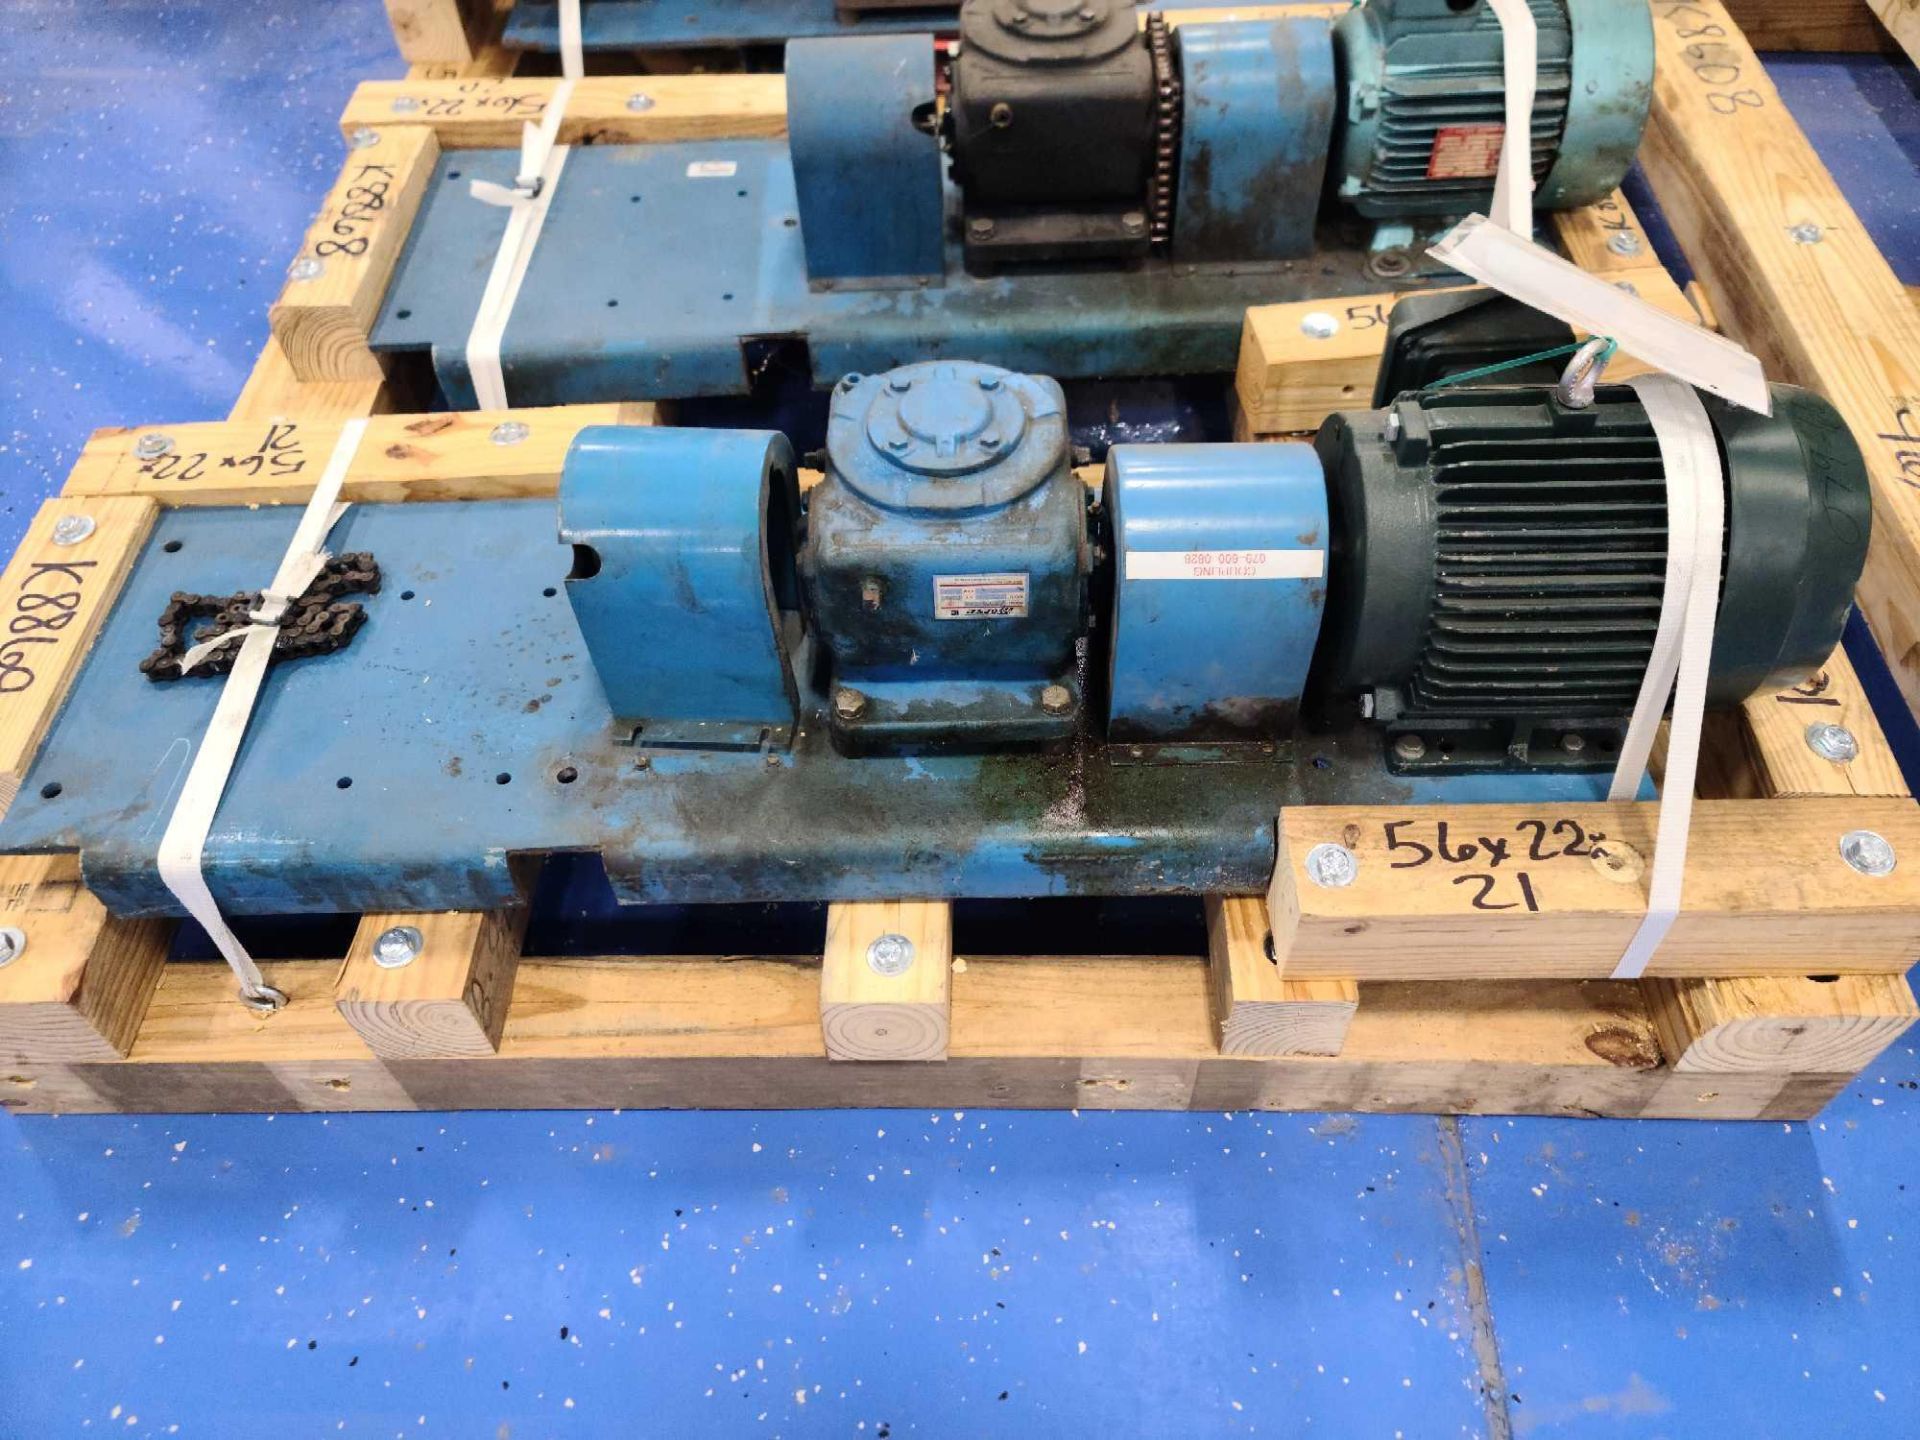 Toshiba 3 HP Motor with Coupling on Steel Skid